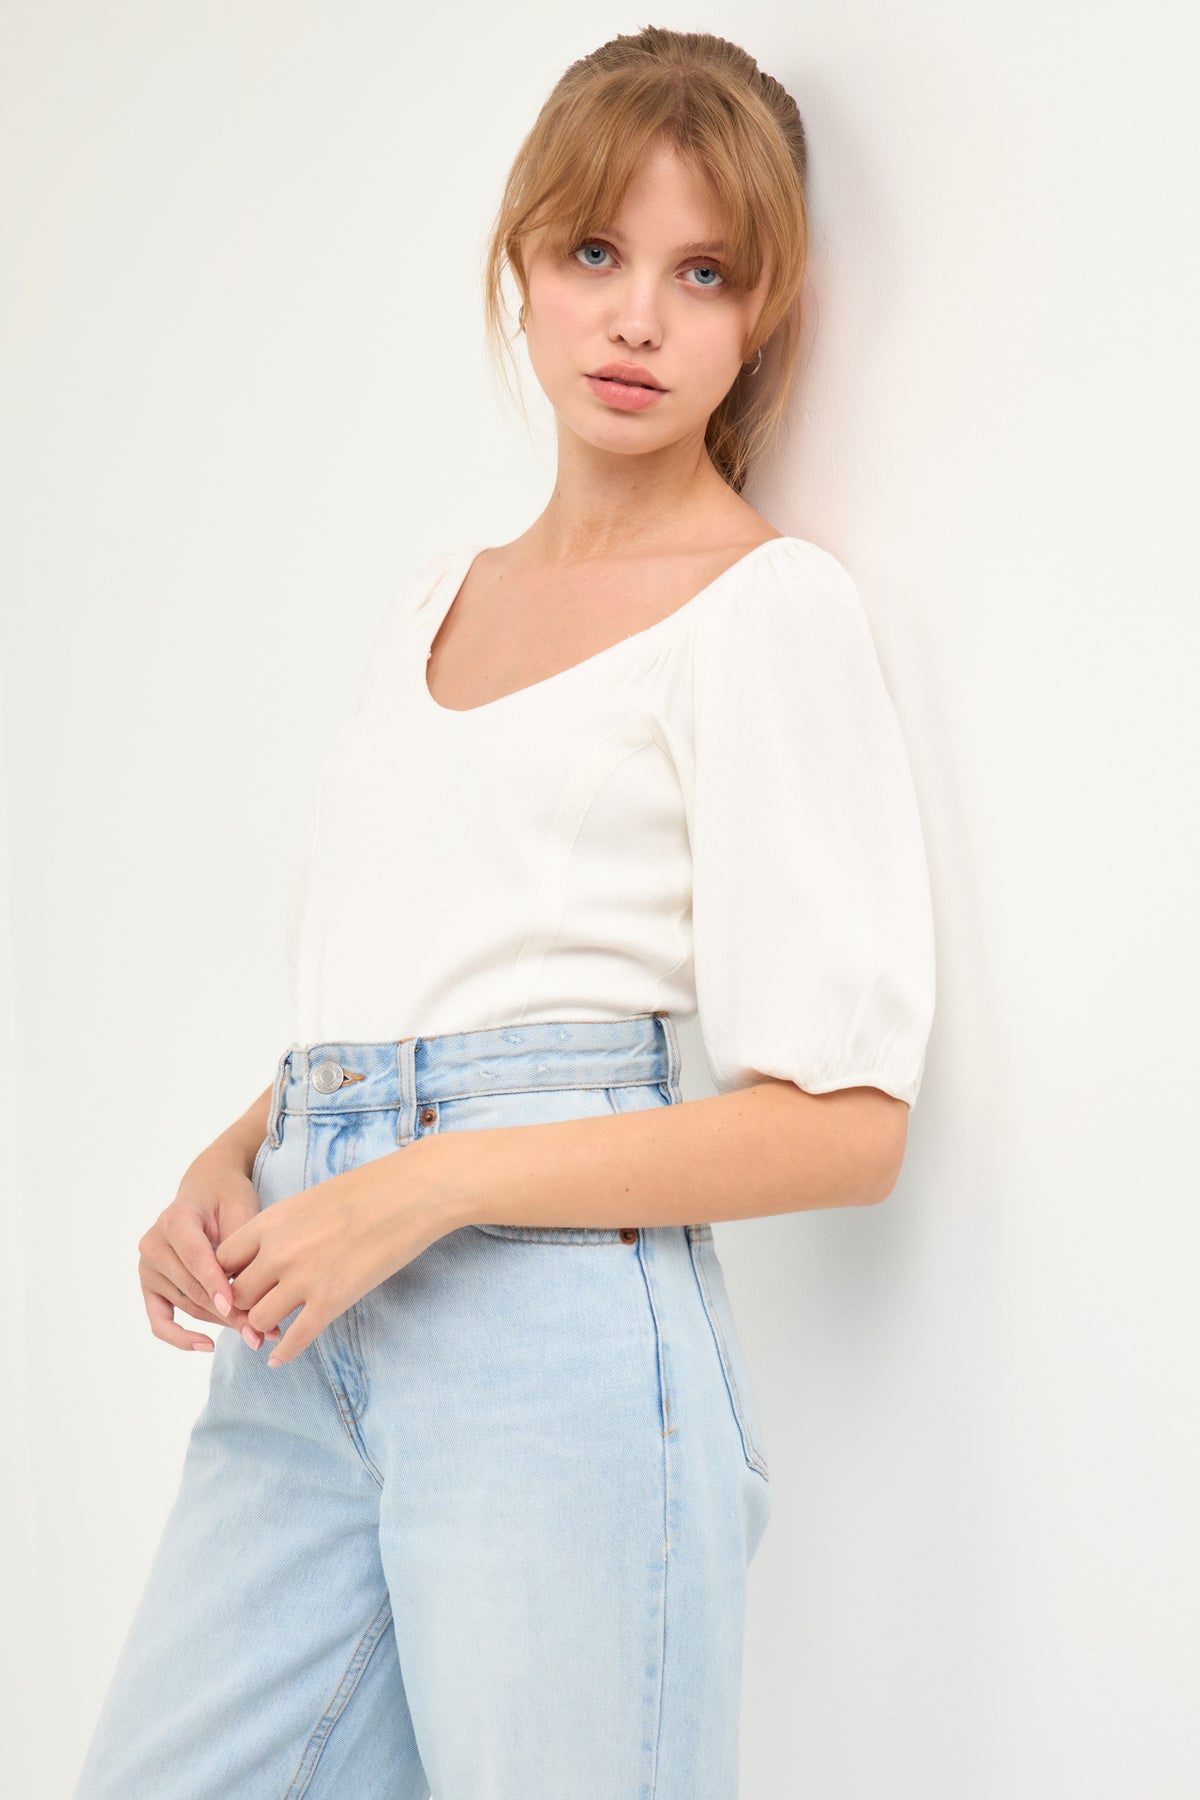 Puff Sleeve Knit Top